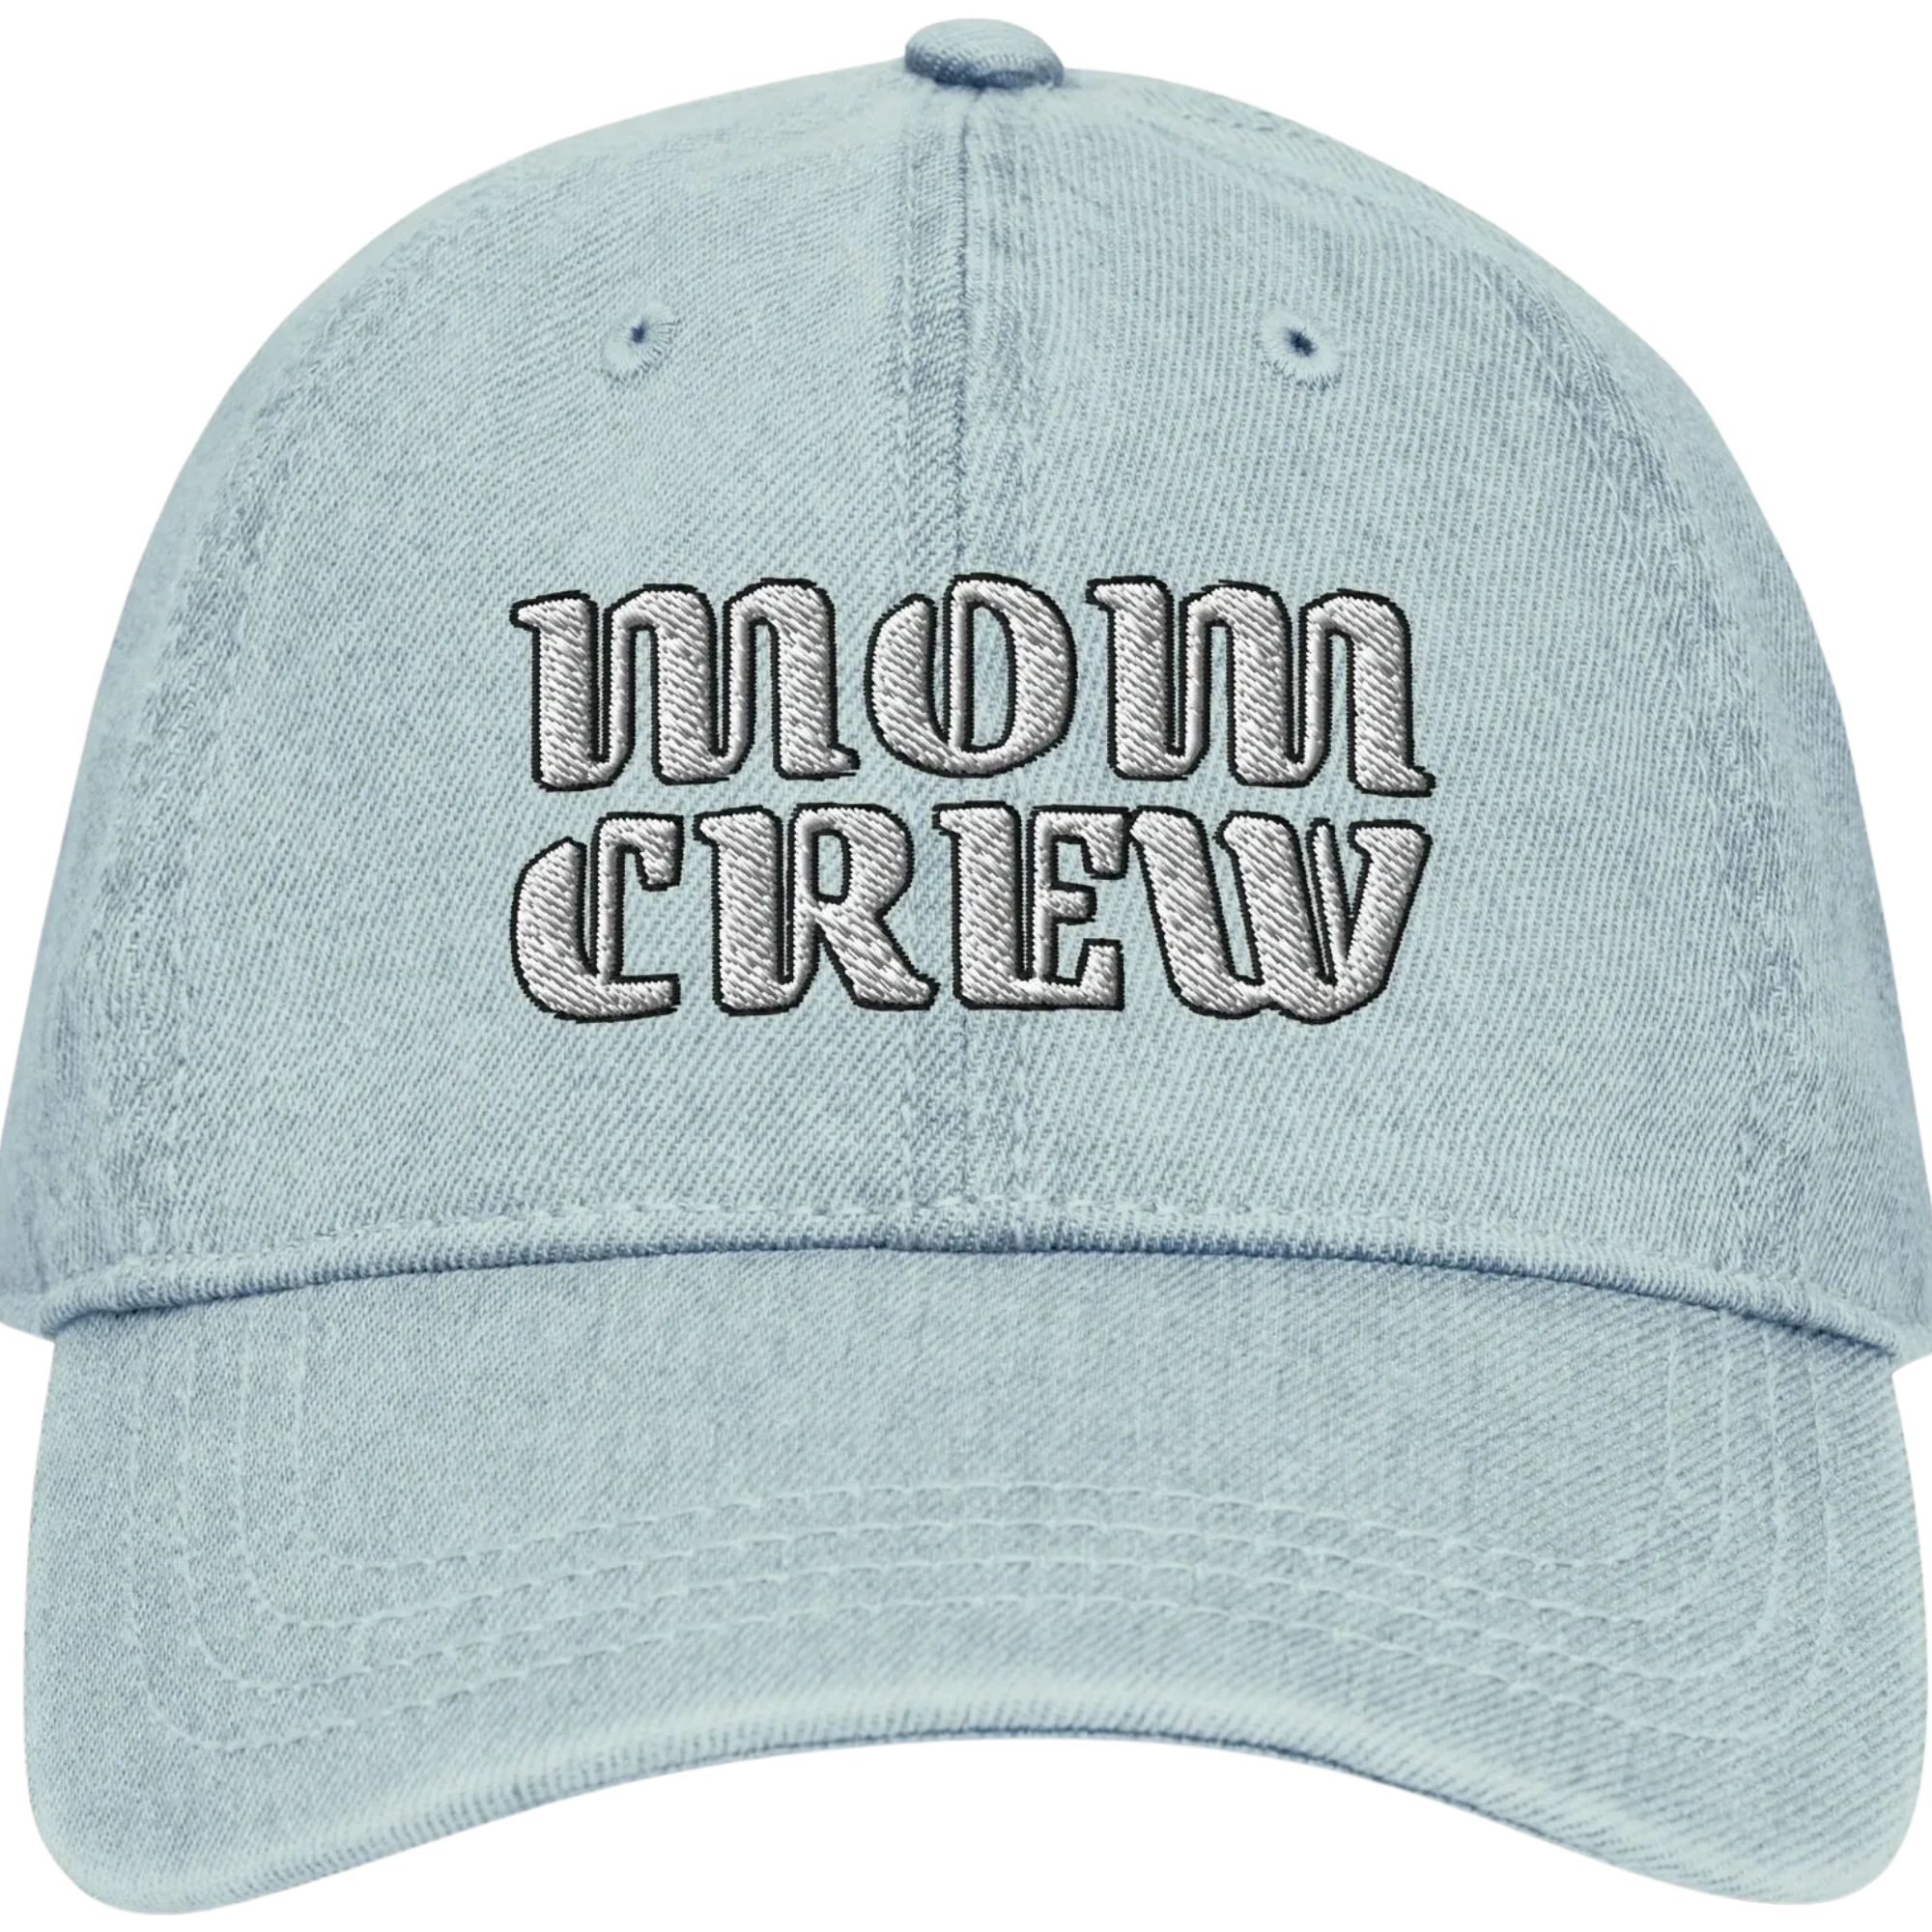 Mom Crew Dad Hat
Dad Hat
Mothers Day Hat